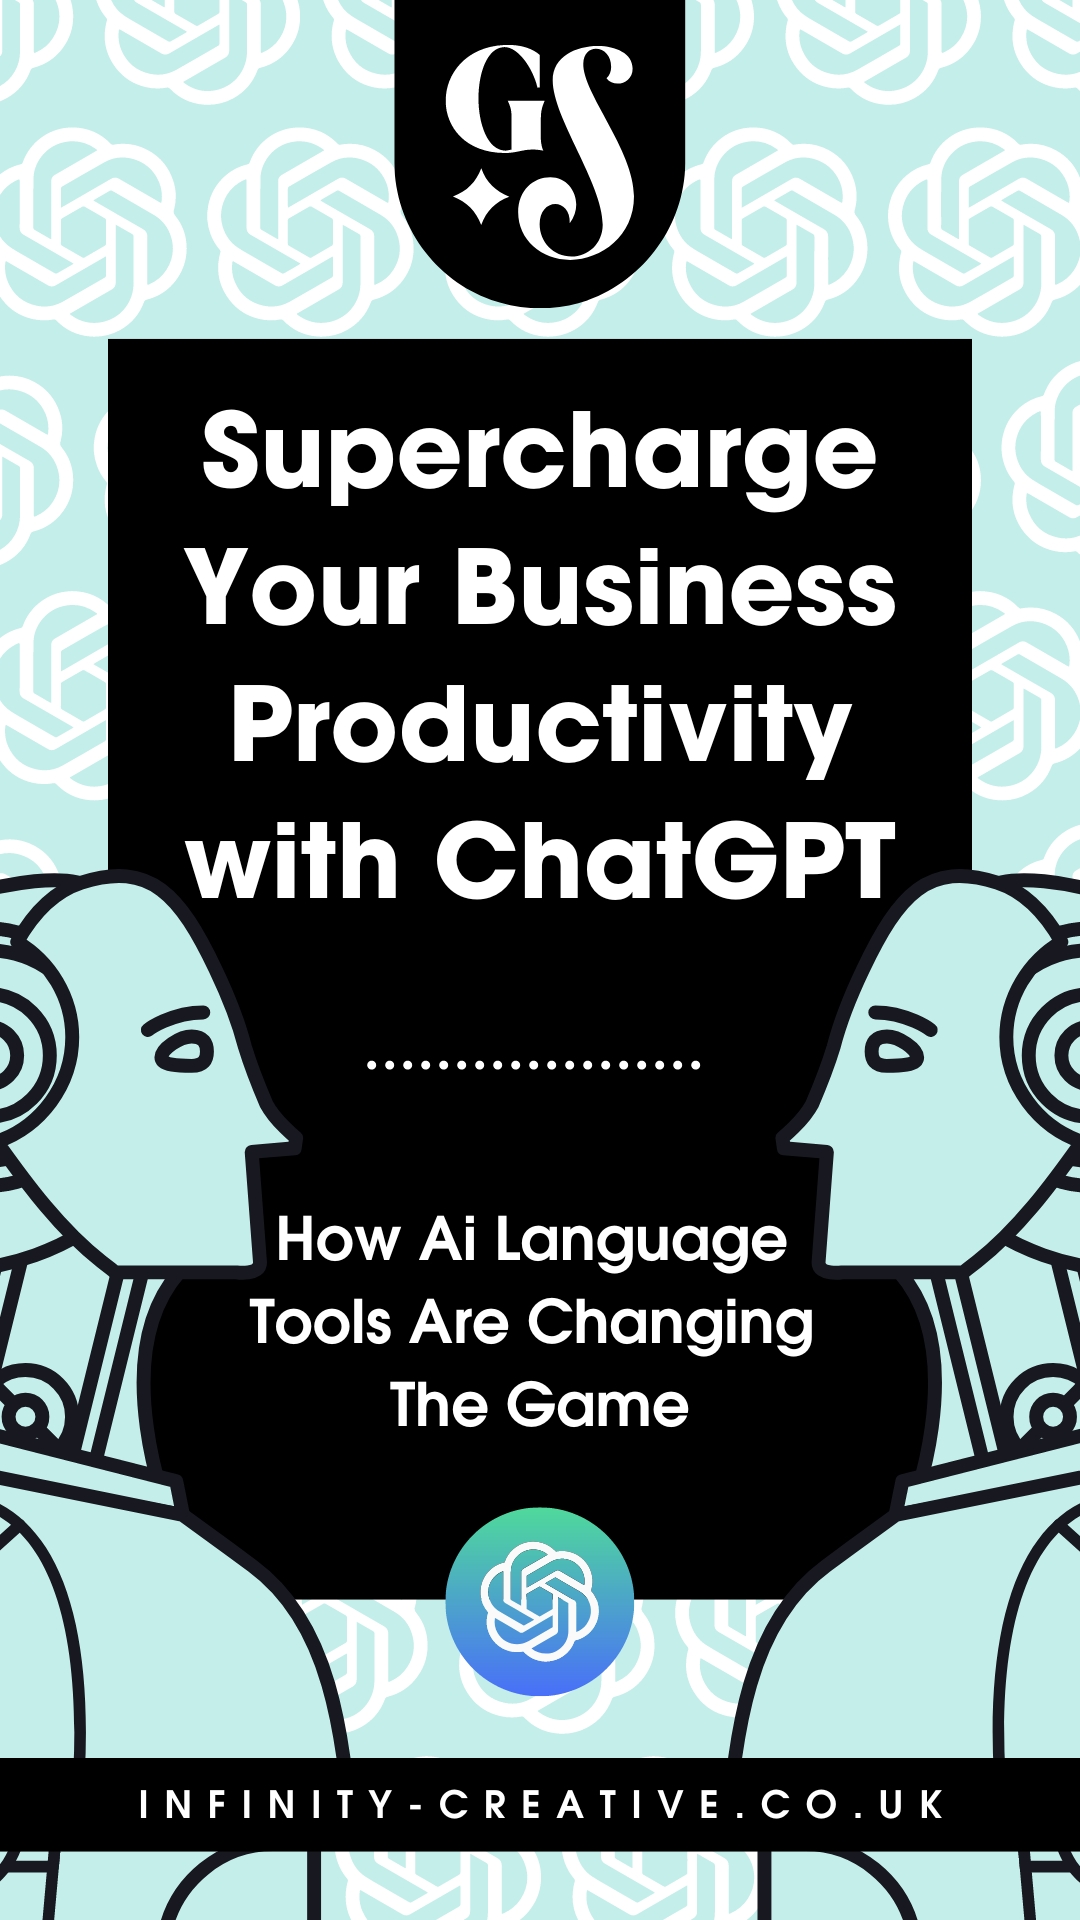 Supercharge Your Business Productivity with ChatGPT